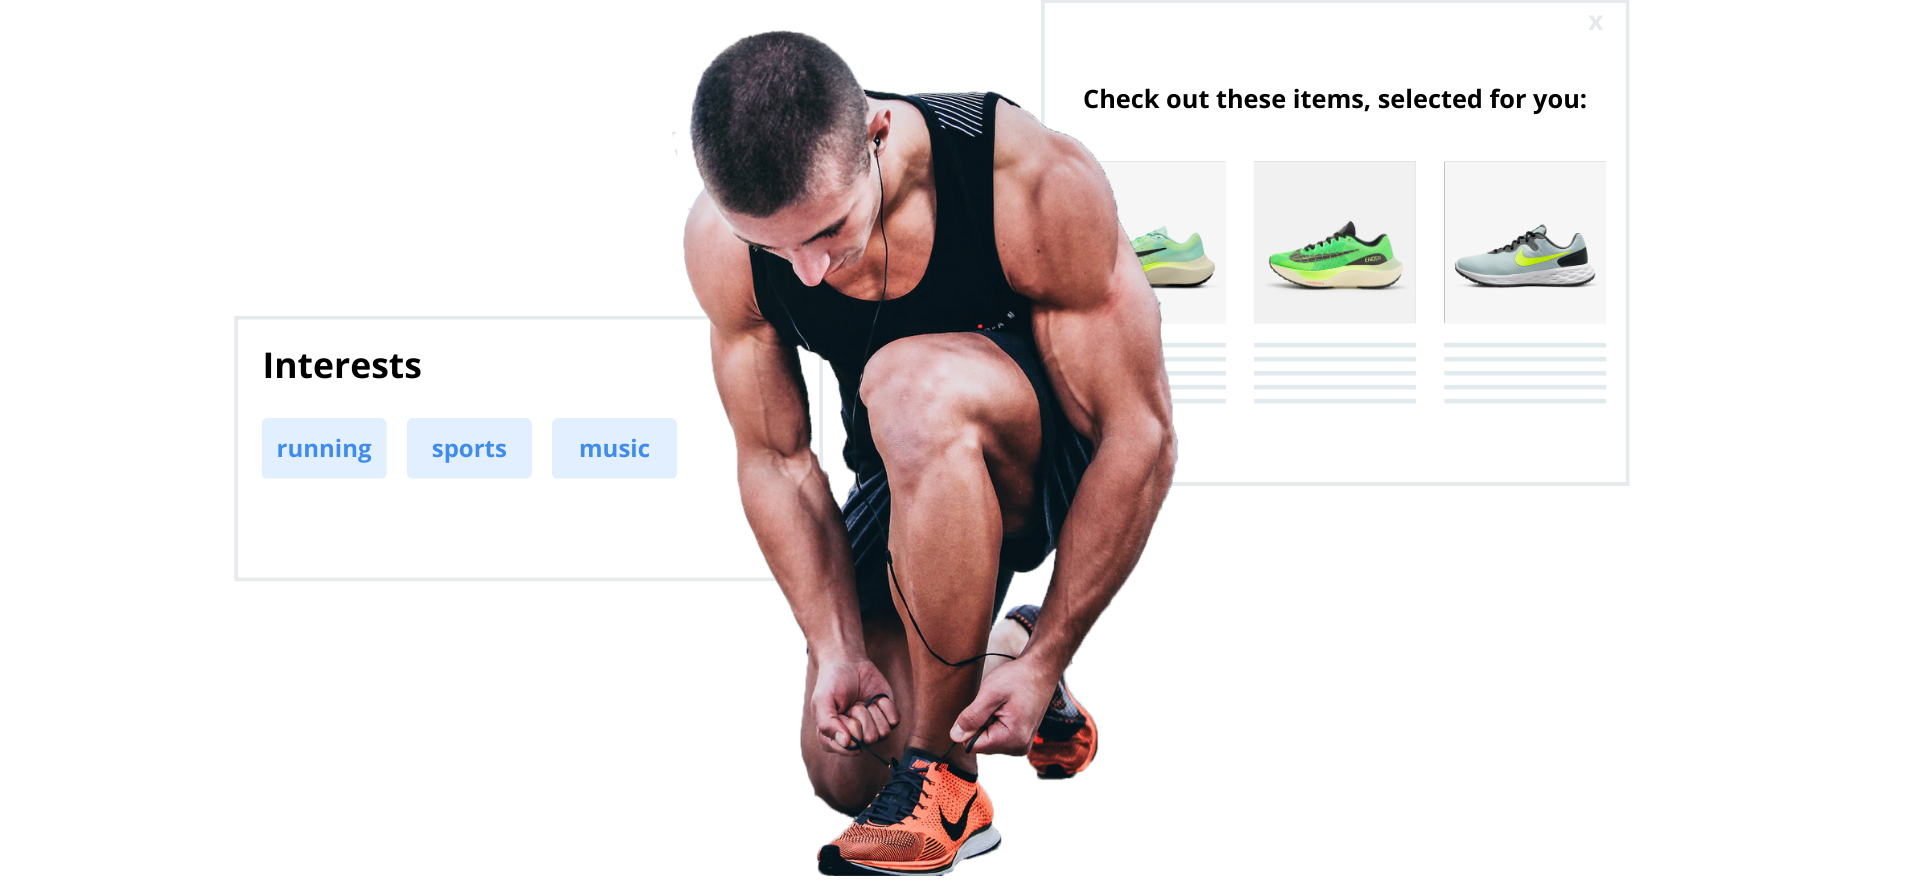  runner surrounded by his interests and recommendation pop-up